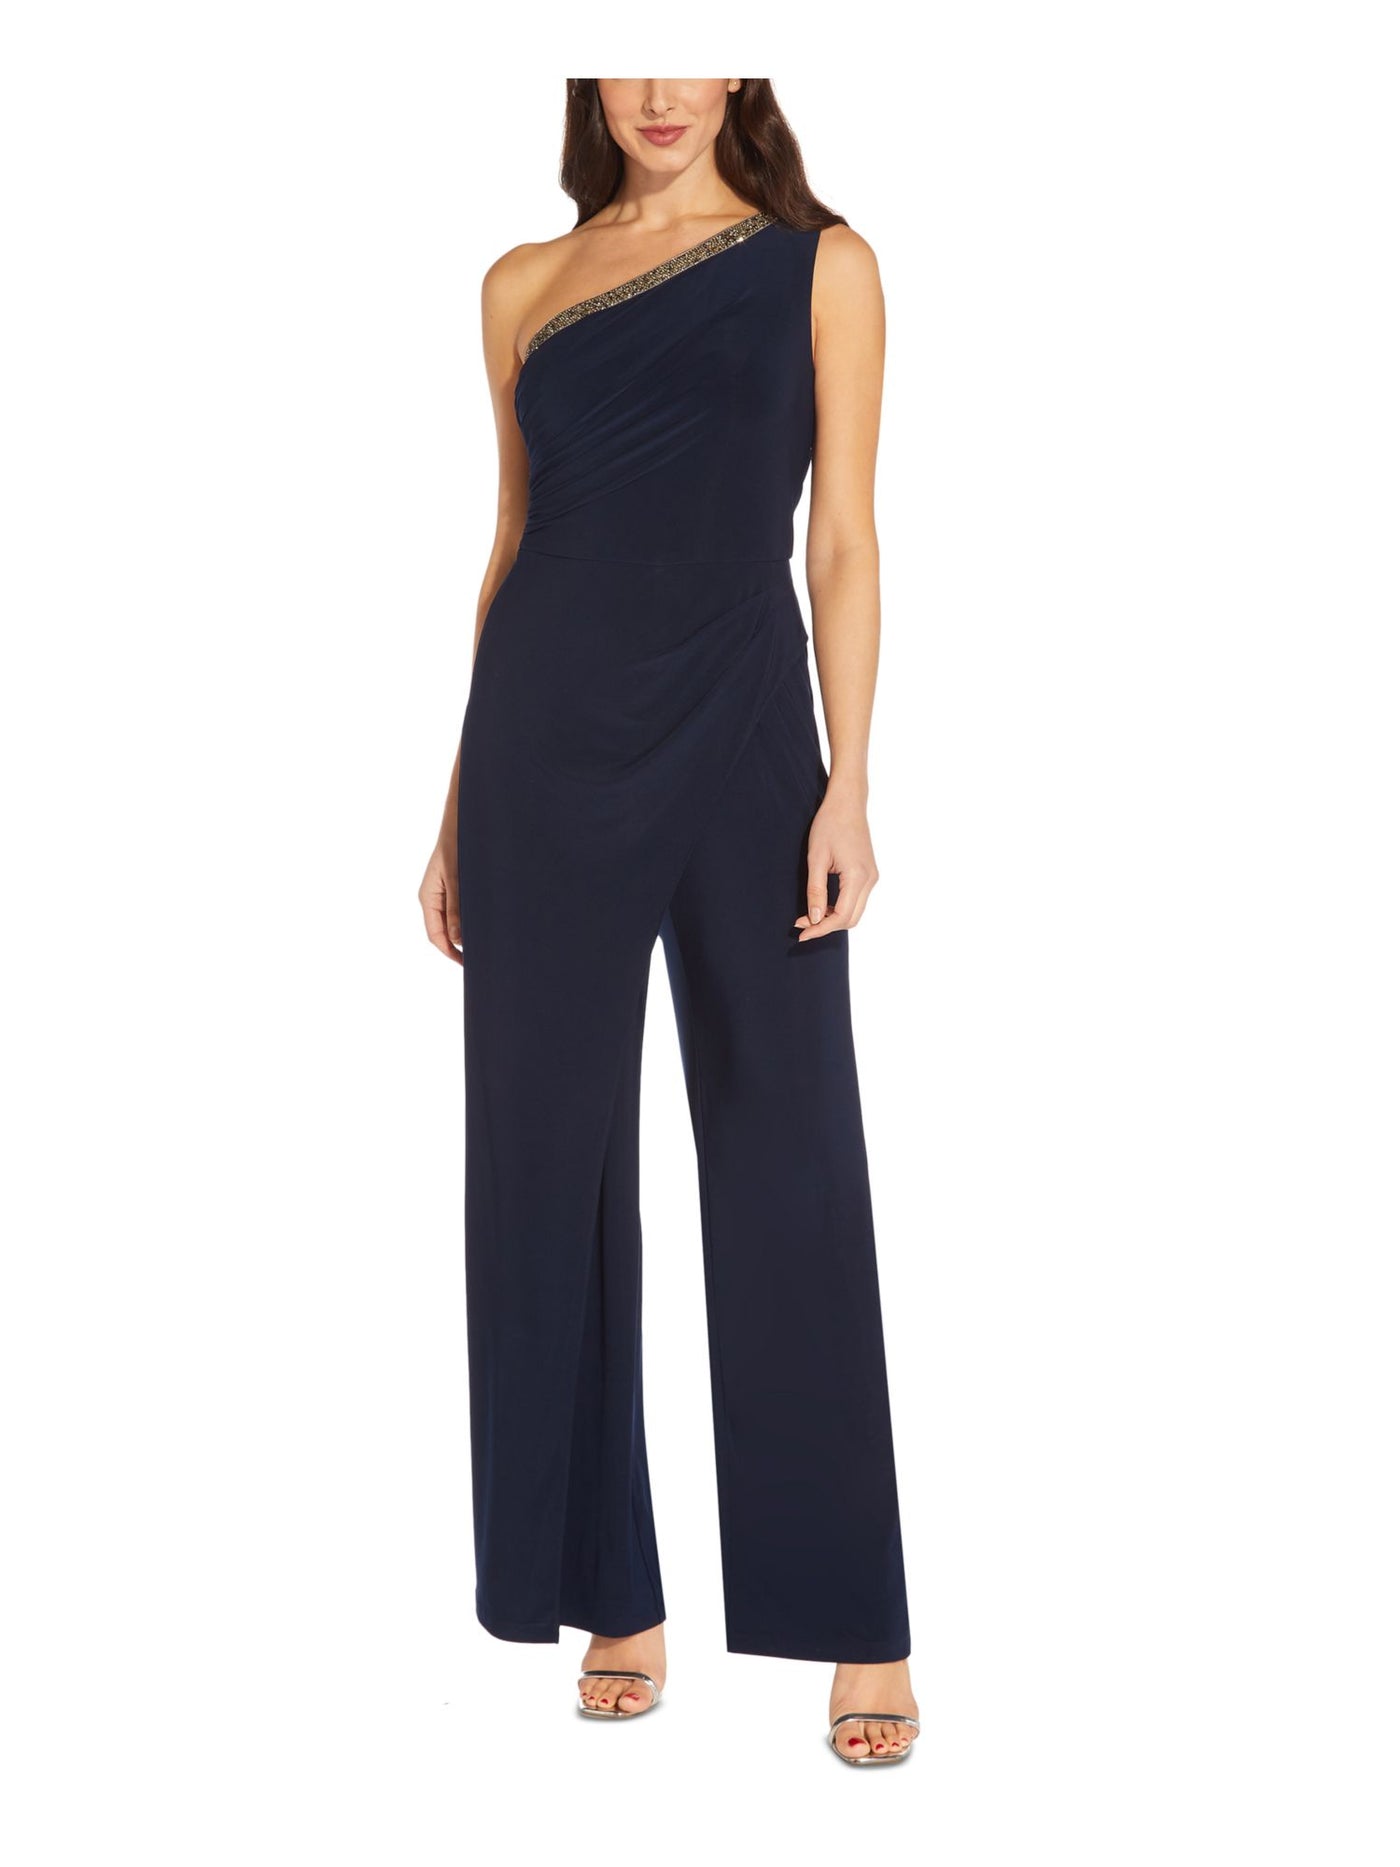 ADRIANNA PAPELL Womens Navy Embellished Ruched Side Zipper Overlay Sleeveless Asymmetrical Neckline Party Wide Leg Jumpsuit 10